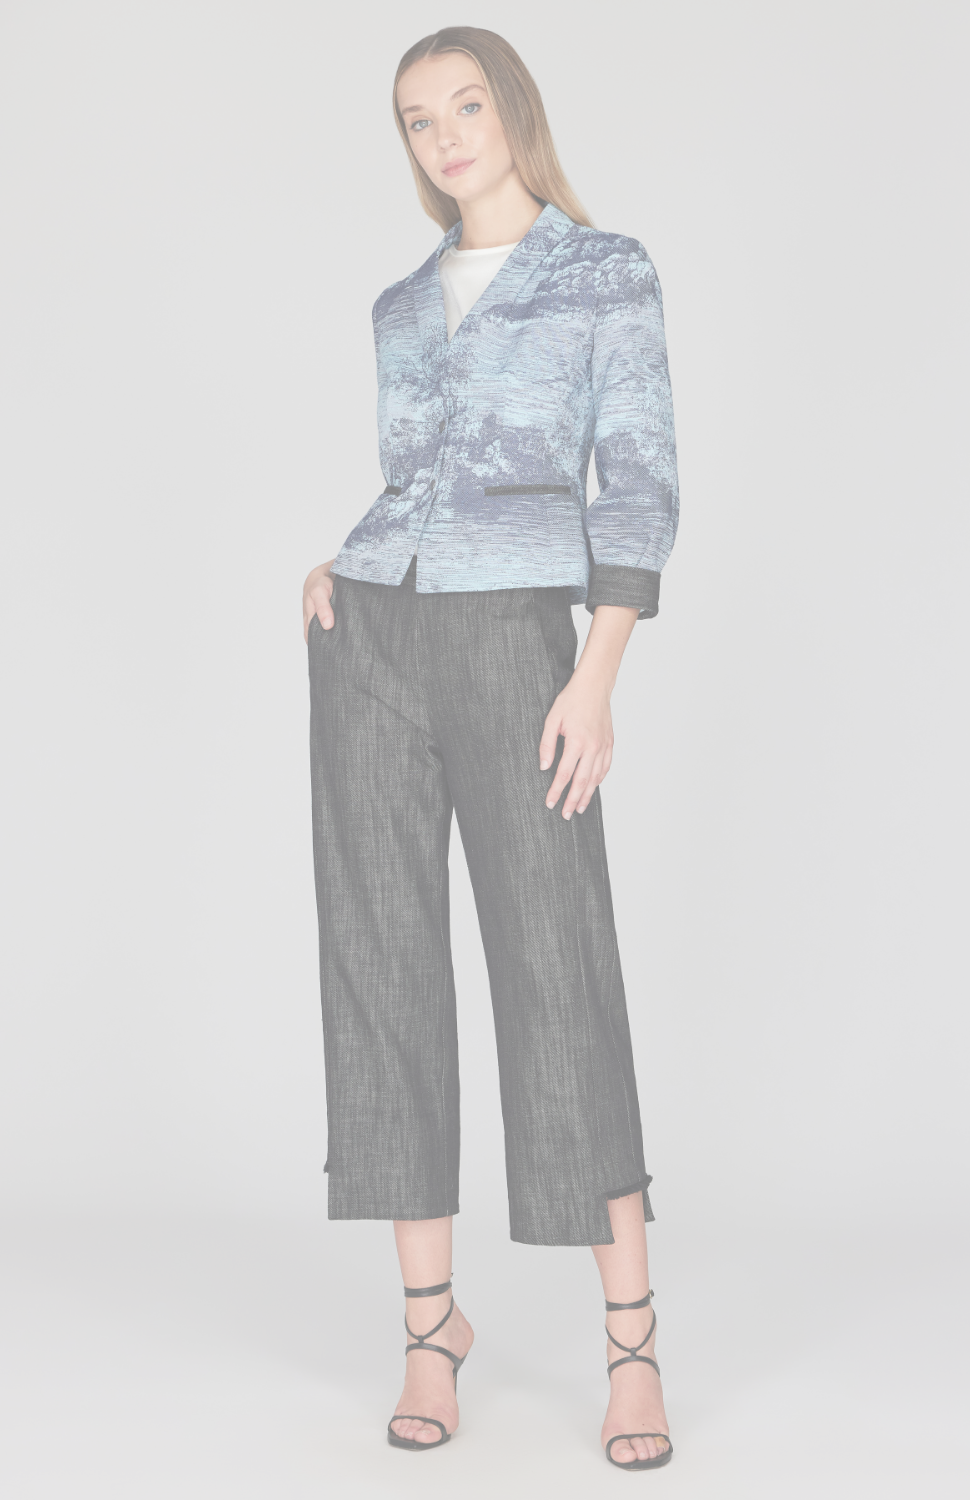 Abstract Toile Denim Short Fitted Jacket